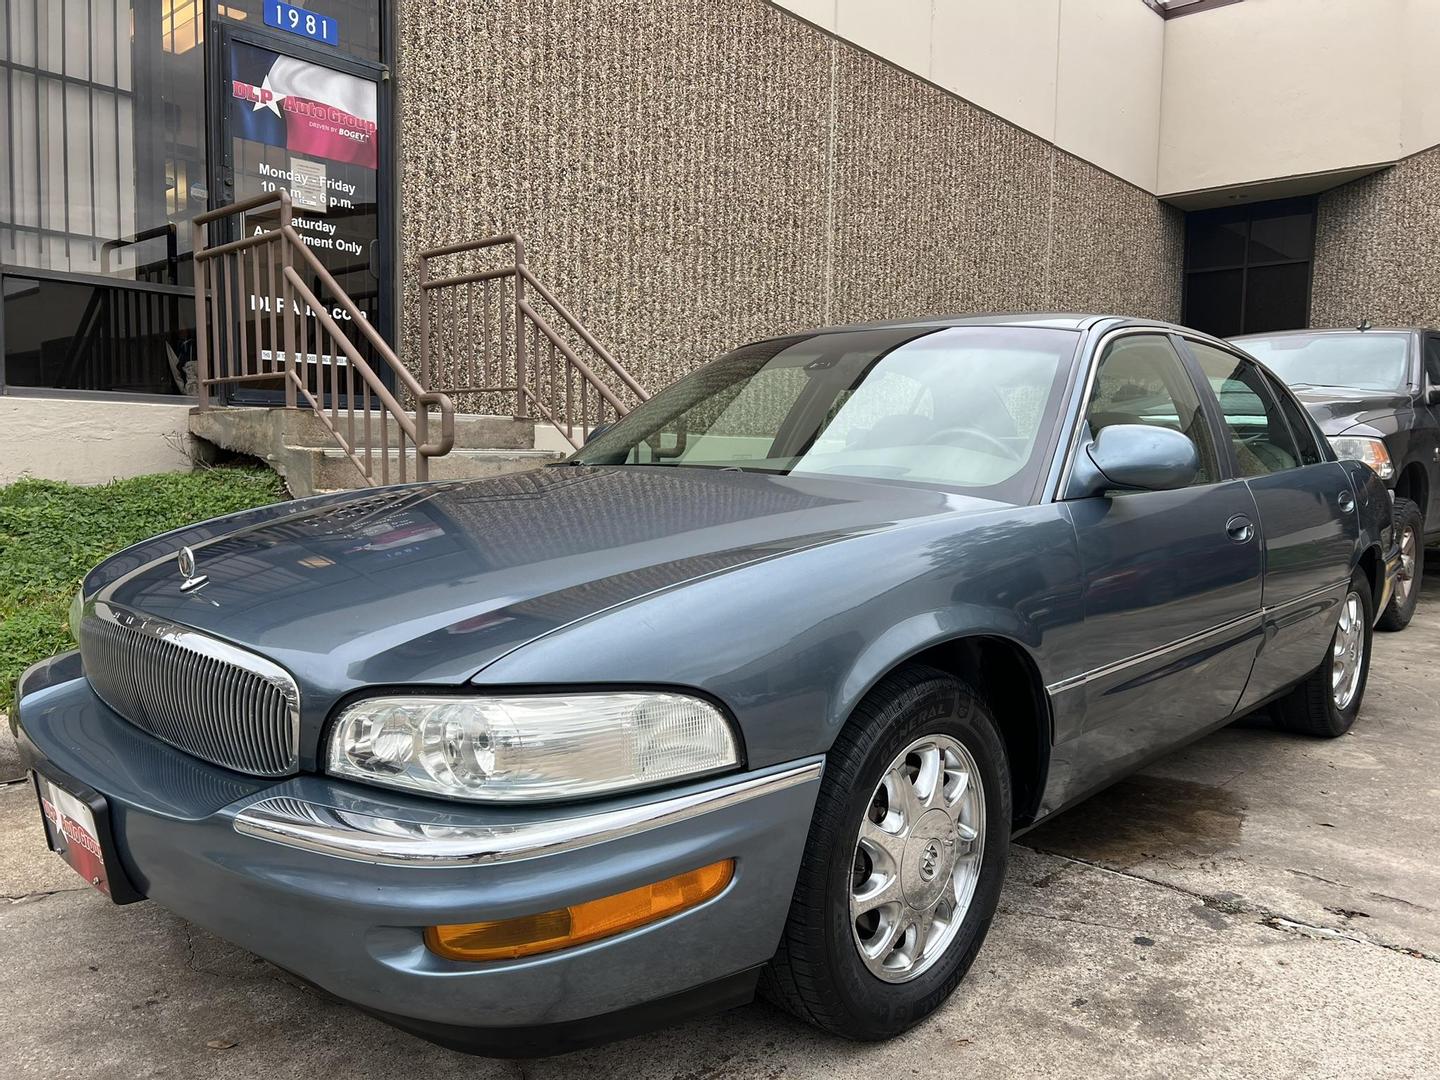 Used 2002 Buick Park Avenue's nationwide for sale - MotorCloud